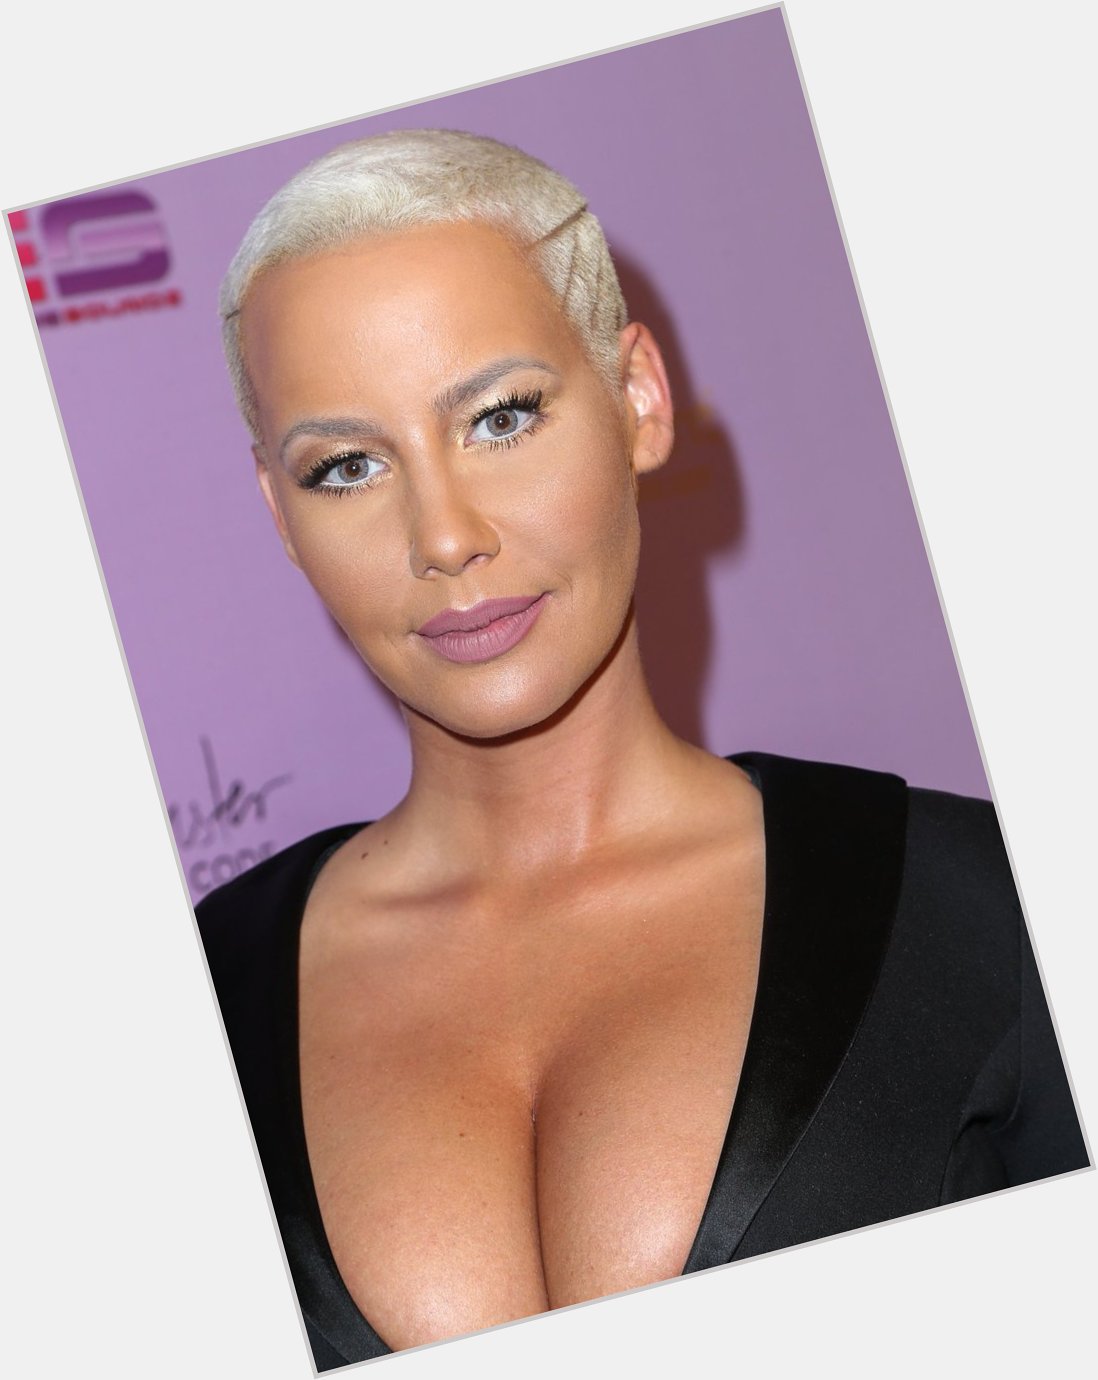 Happy birthday to the bald beauty Amber Rose! 